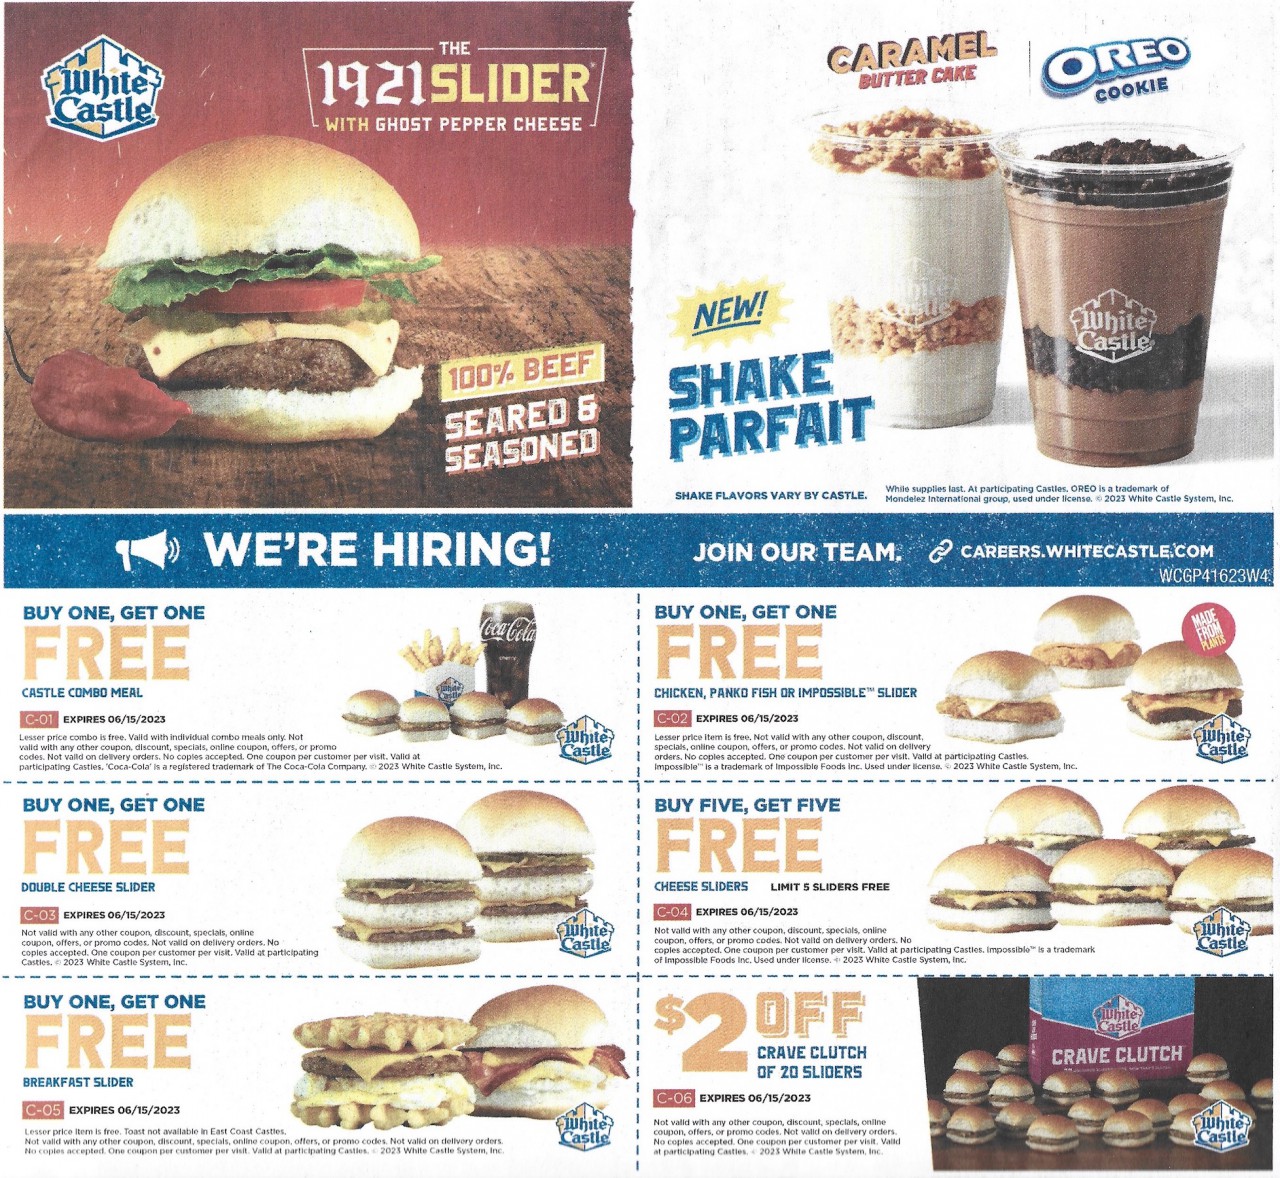 White Castle Printable Coupons - Buy One Get One Free - Expires 06/15/2023